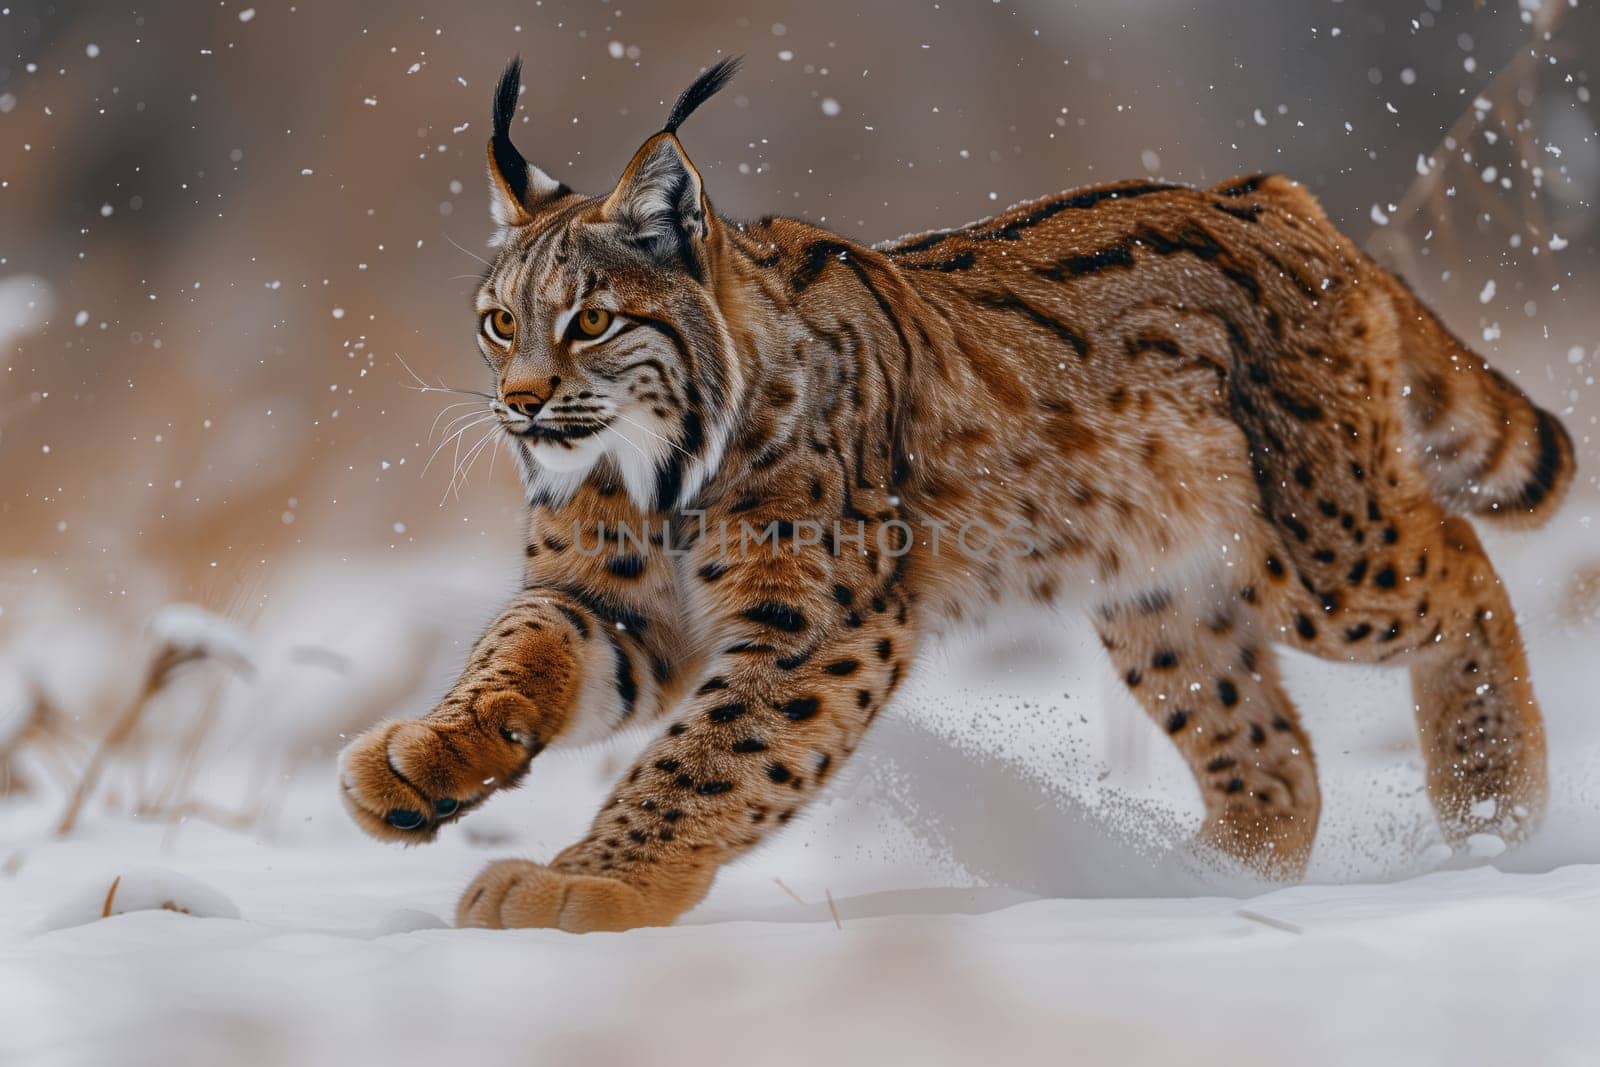 A Felidae species, the lynx, a small to mediumsized cat with whiskers and fur, is a carnivorous terrestrial animal walking through the snow with its snout and catlike movements